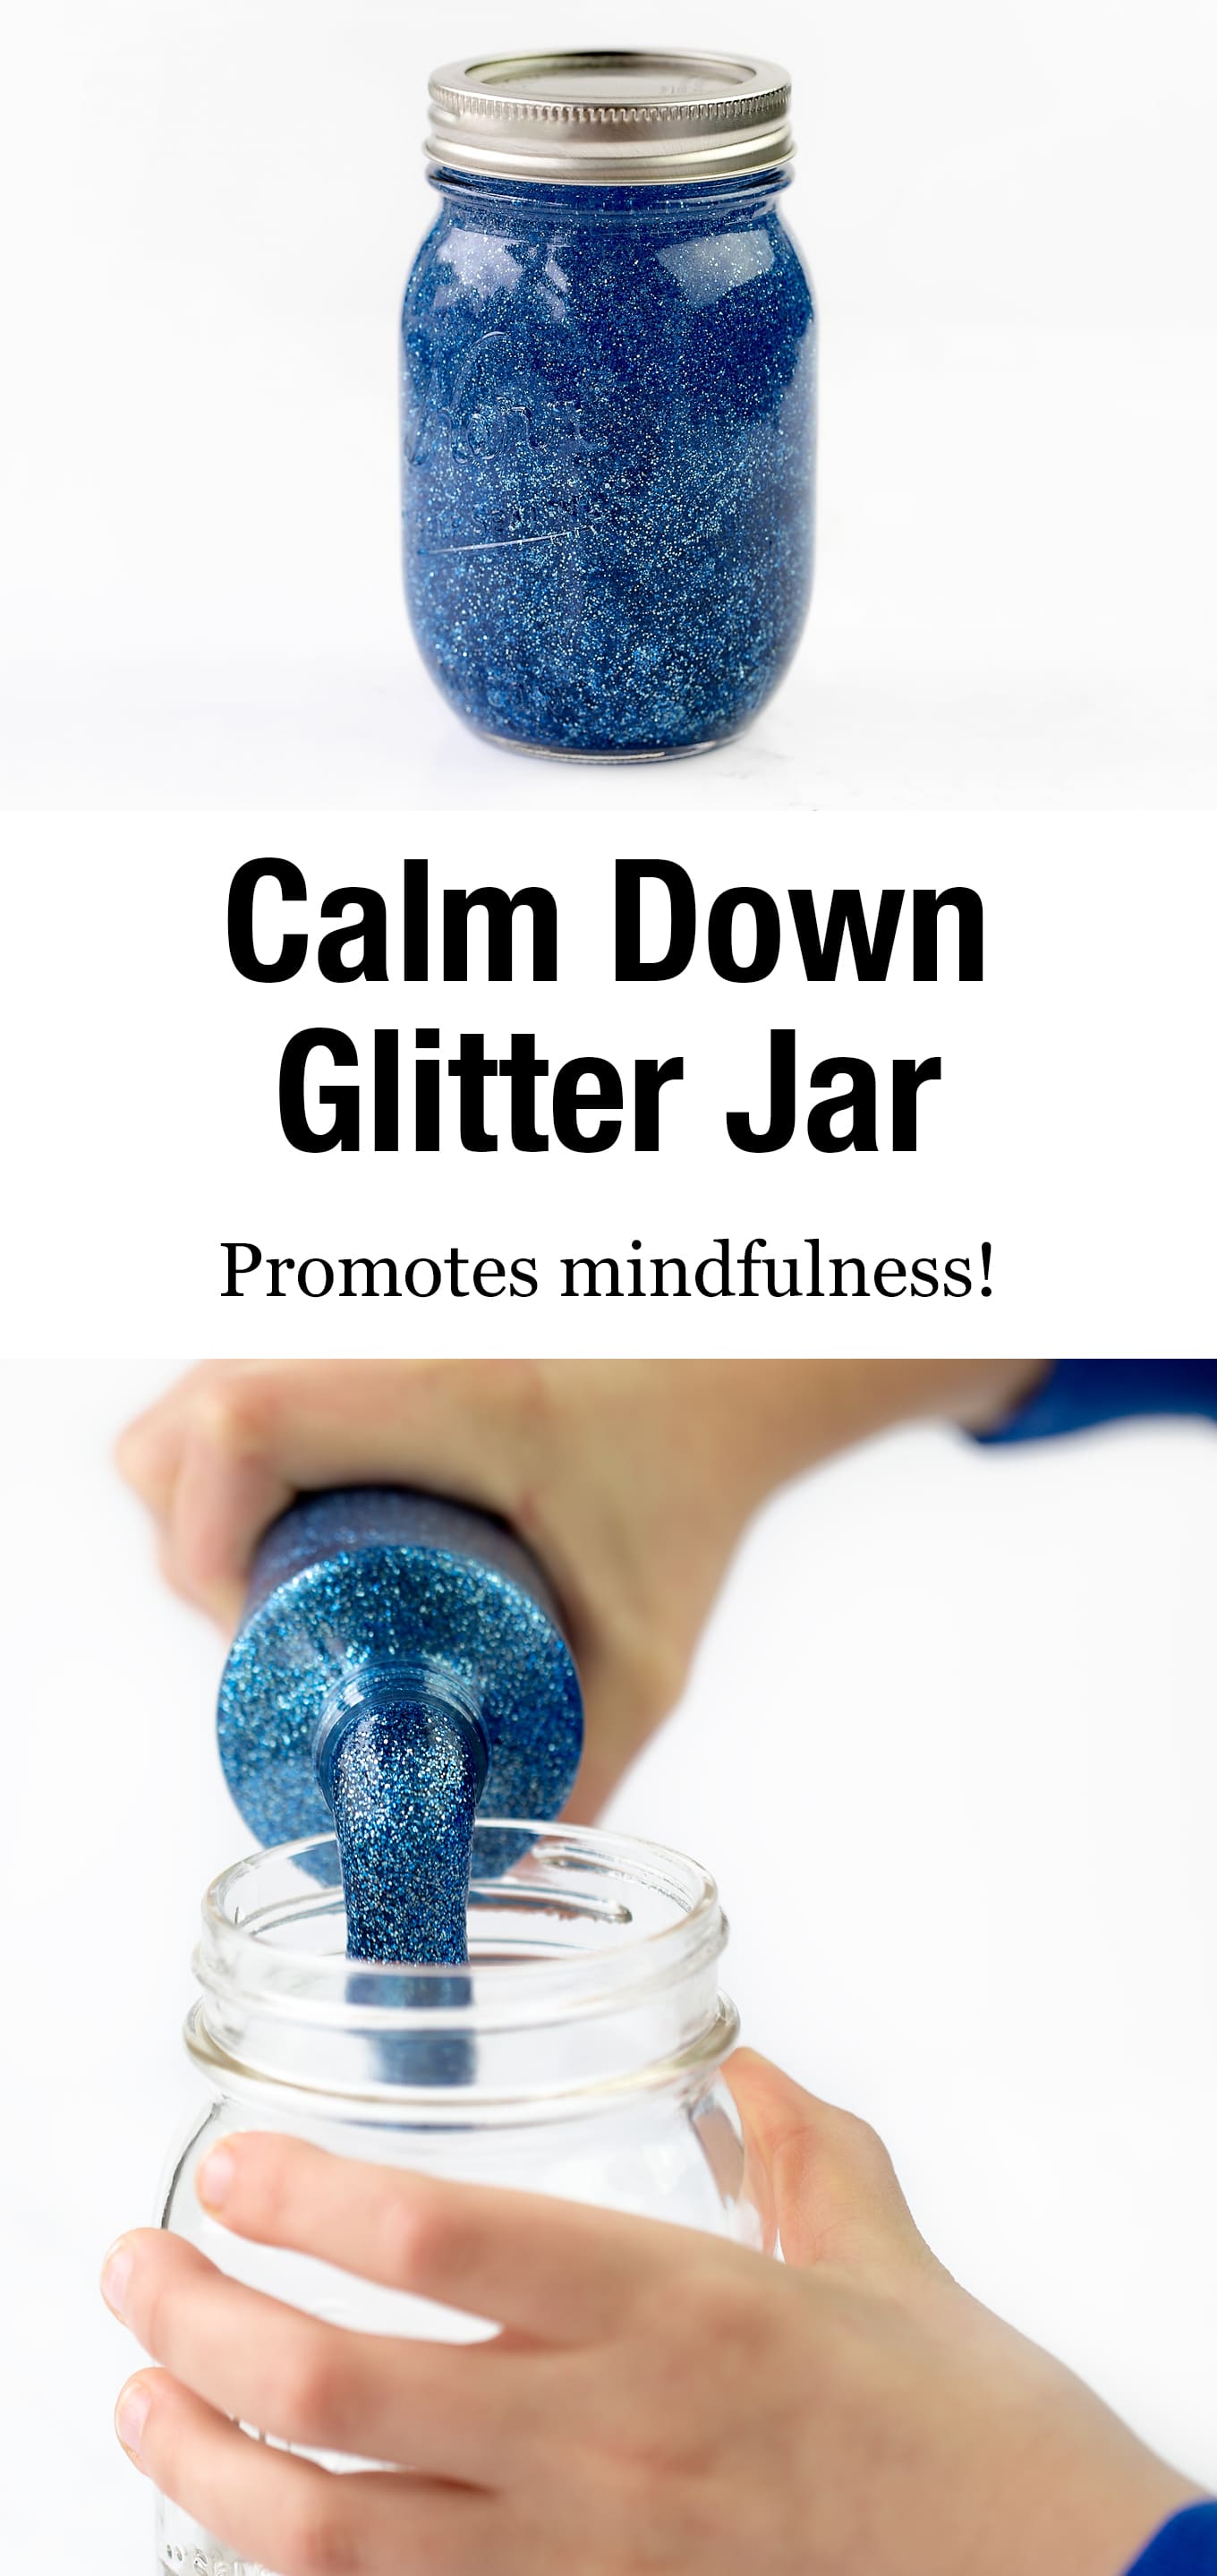 Mindfulness is an important skill for kids to develop. Learn how to make a calm down glitter jar to promote mindfulness and calm in your home or classroom. #glitterjar #socialemotionallearning #sensorybottles #glittertimer #calmdown #angermanagement via @firefliesandmudpies